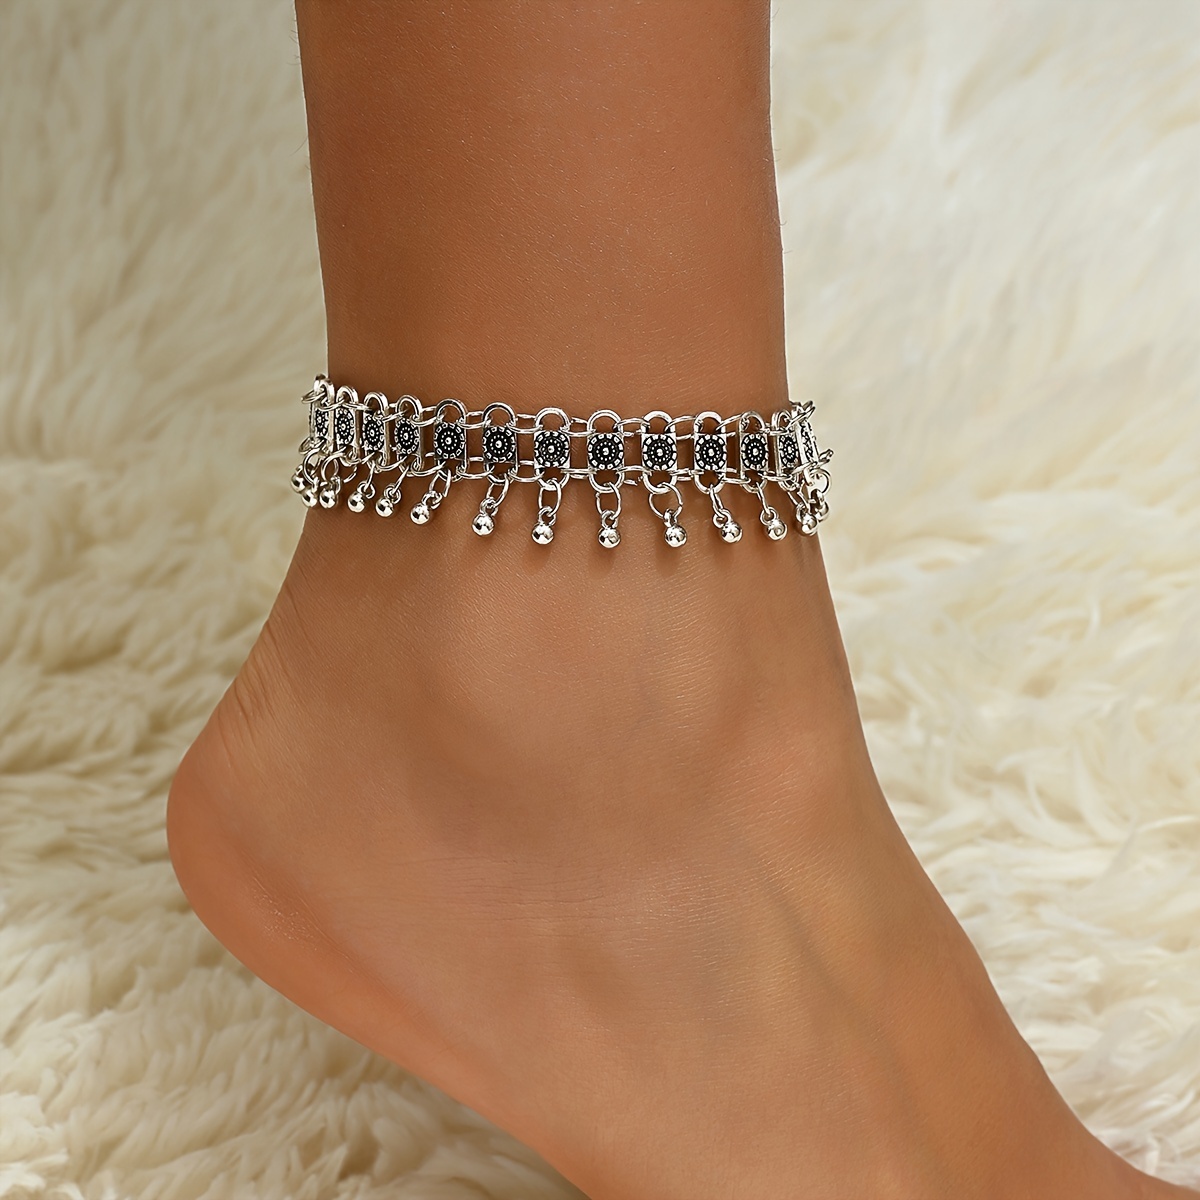 

Bohemian Style Silver-plated Anklet - Zinc Alloy Beach Vacation Ankle Bracelet With Charms And Tassels - Daily & Holiday Accessory For All Seasons